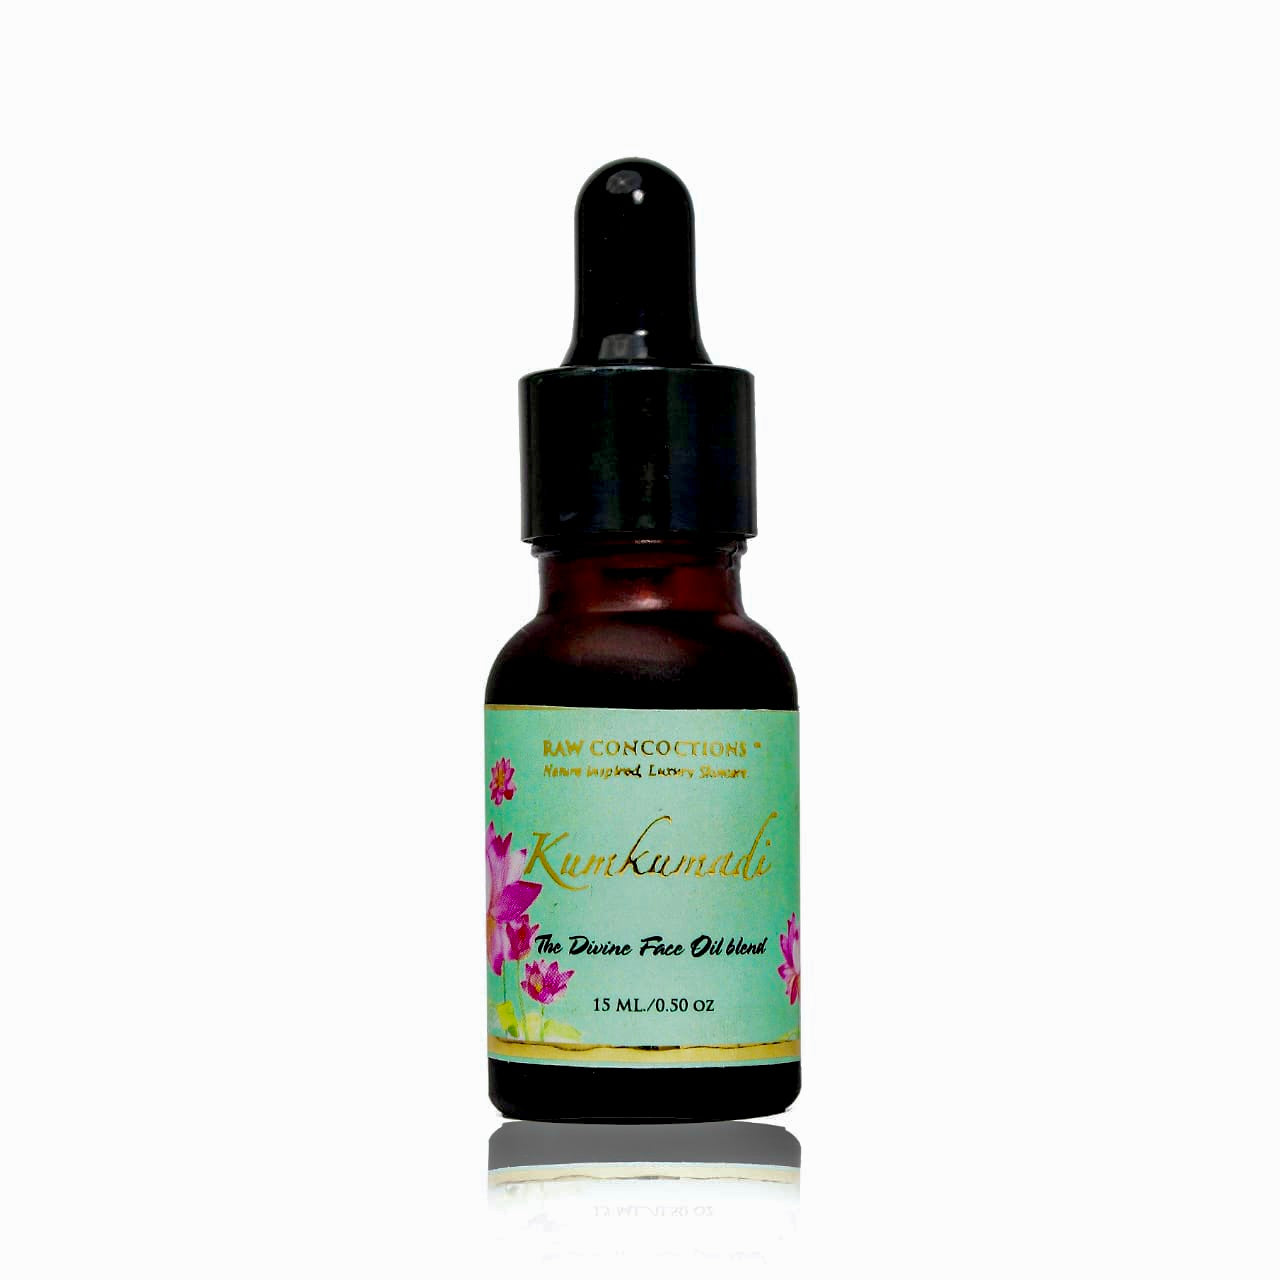 KUMKUMADI - THE DIVINE FACE OIL BLEND - Raw Concoctions